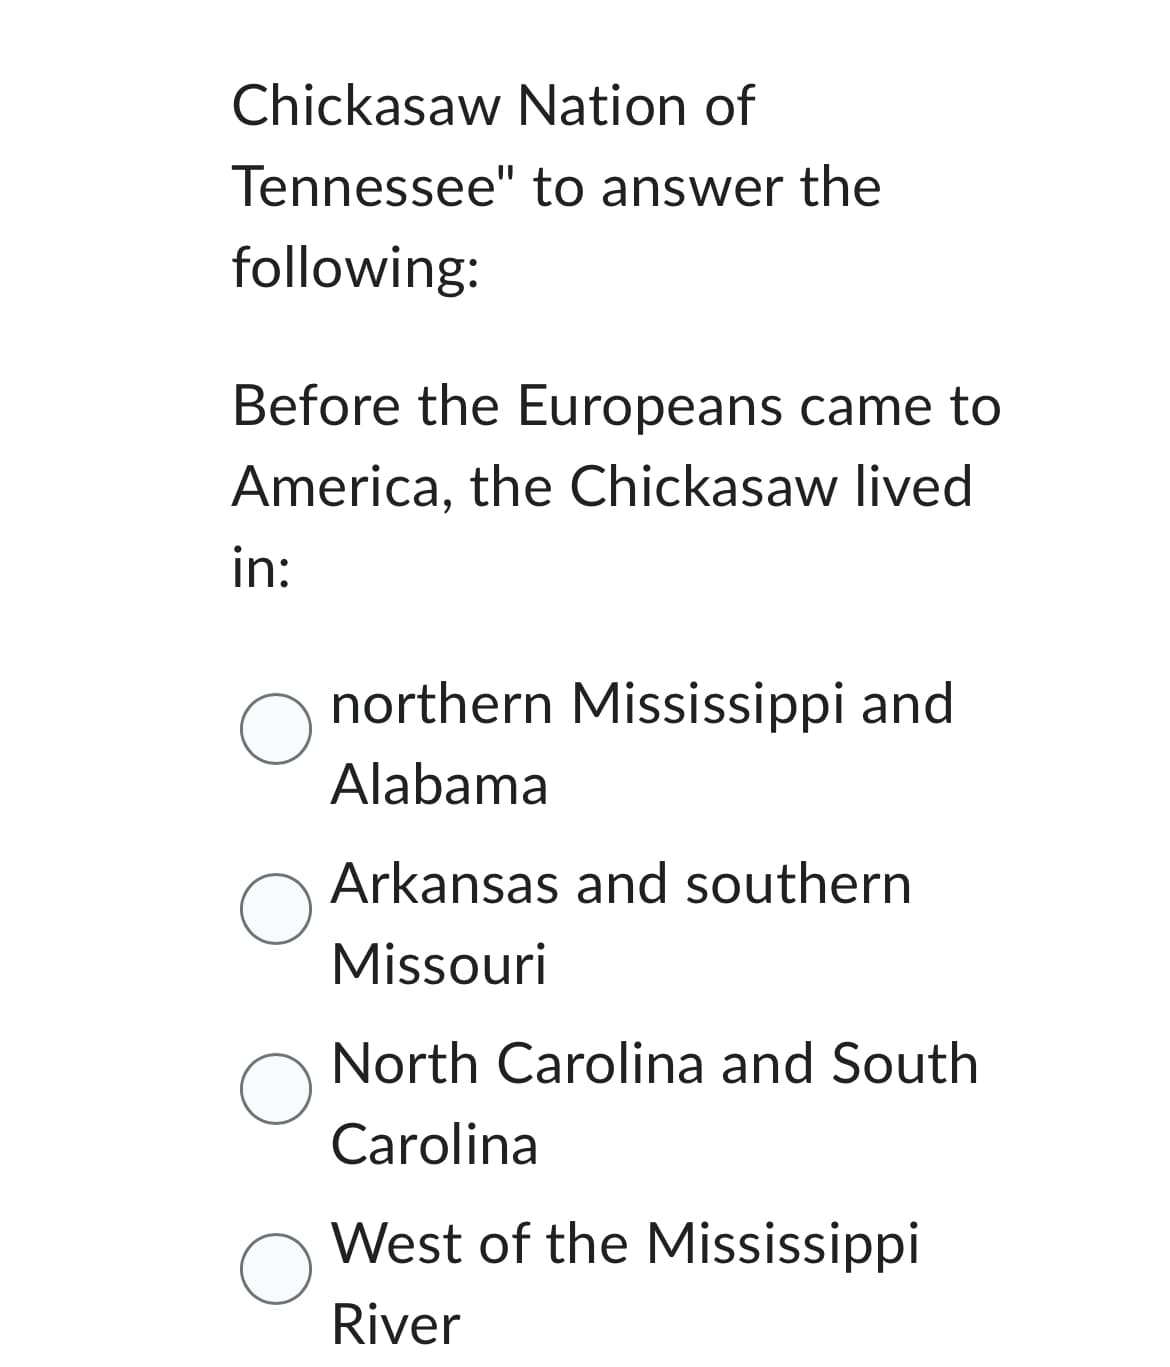 Chickasaw Nation of
Tennessee" to answer the
following:
Before the Europeans came to
America, the Chickasaw lived
in:
O
O
O
northern Mississippi and
Alabama
Arkansas and southern
Missouri
North Carolina and South
Carolina
West of the Mississippi
River